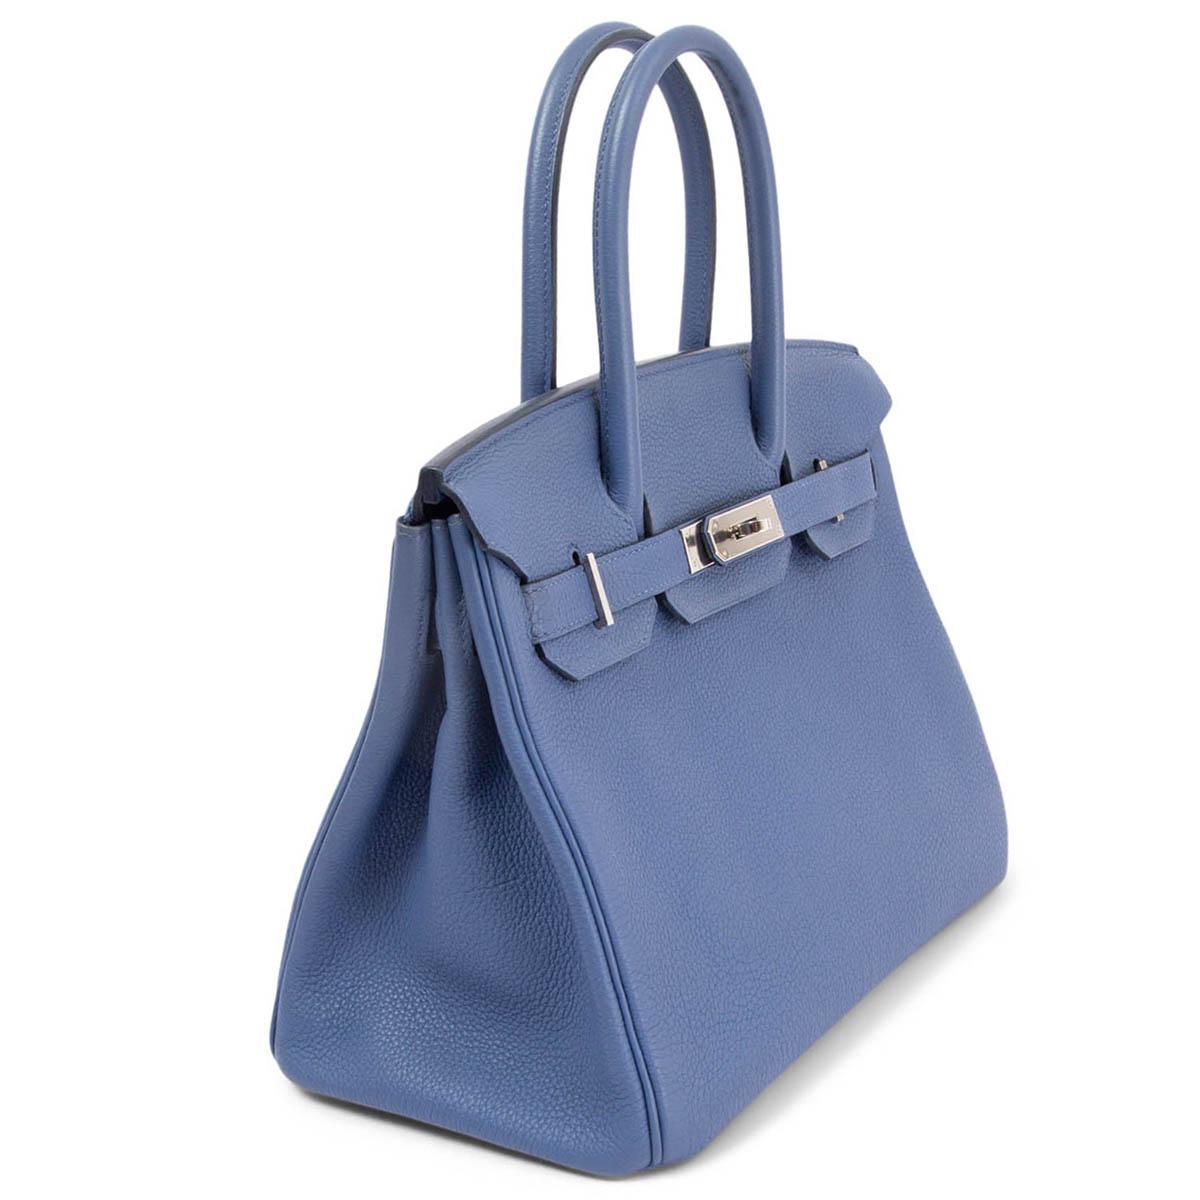 100% authentic Hermès Birkin 30 bag in Brighton blue Togo leather with palladium hardware. Lined in Chevre (goat skin) with an open pocket against the front and a zipper pocket against the back. Has been carried with darkening to the underside of